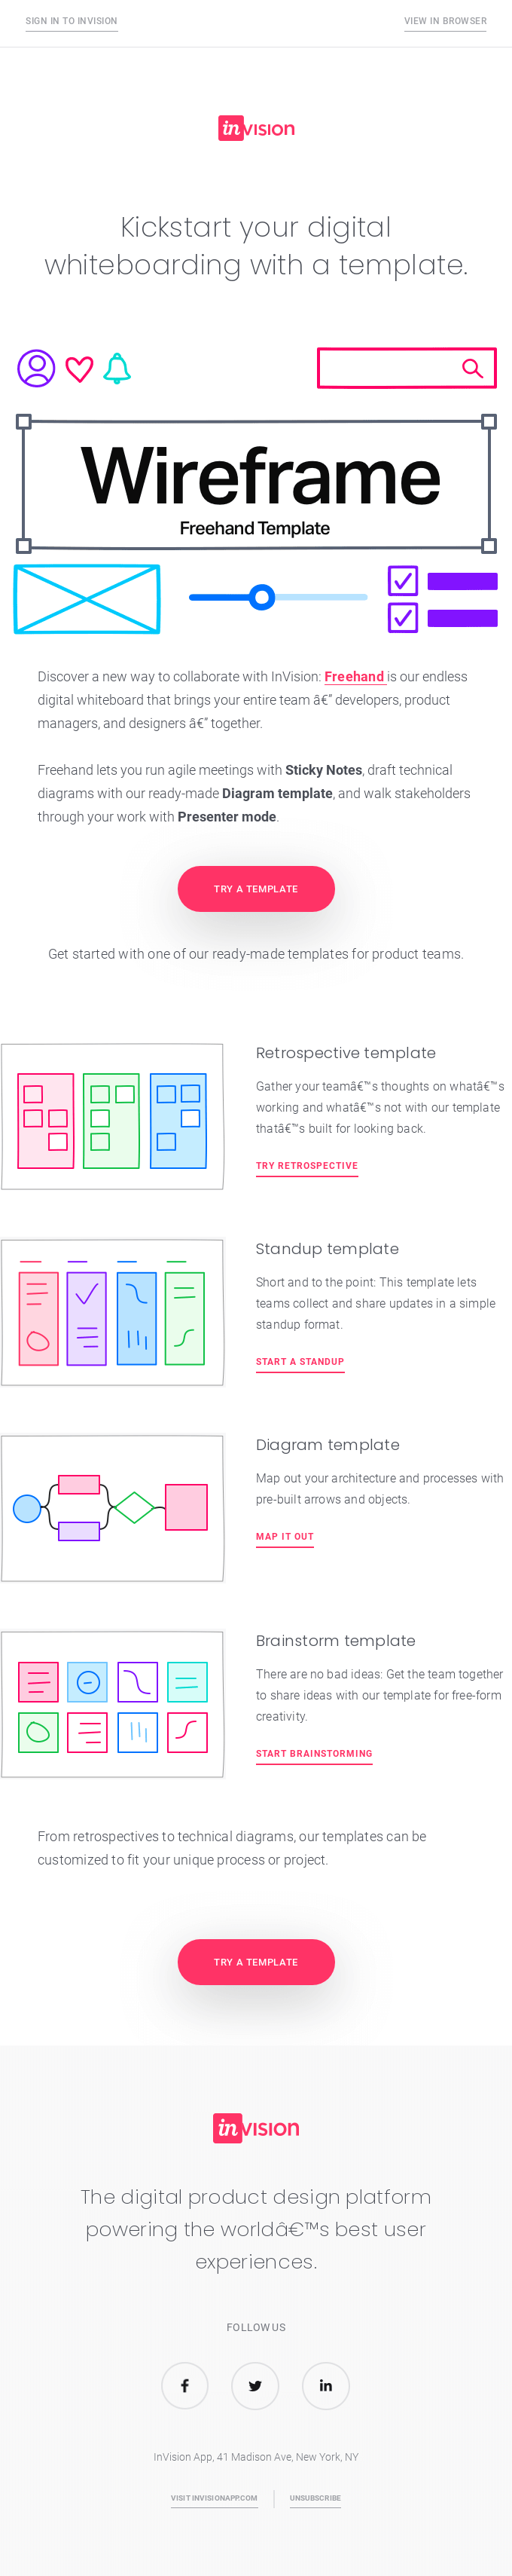 New for Freehand: Templates for retrospectives, standups and more - Invision Email Newsletter